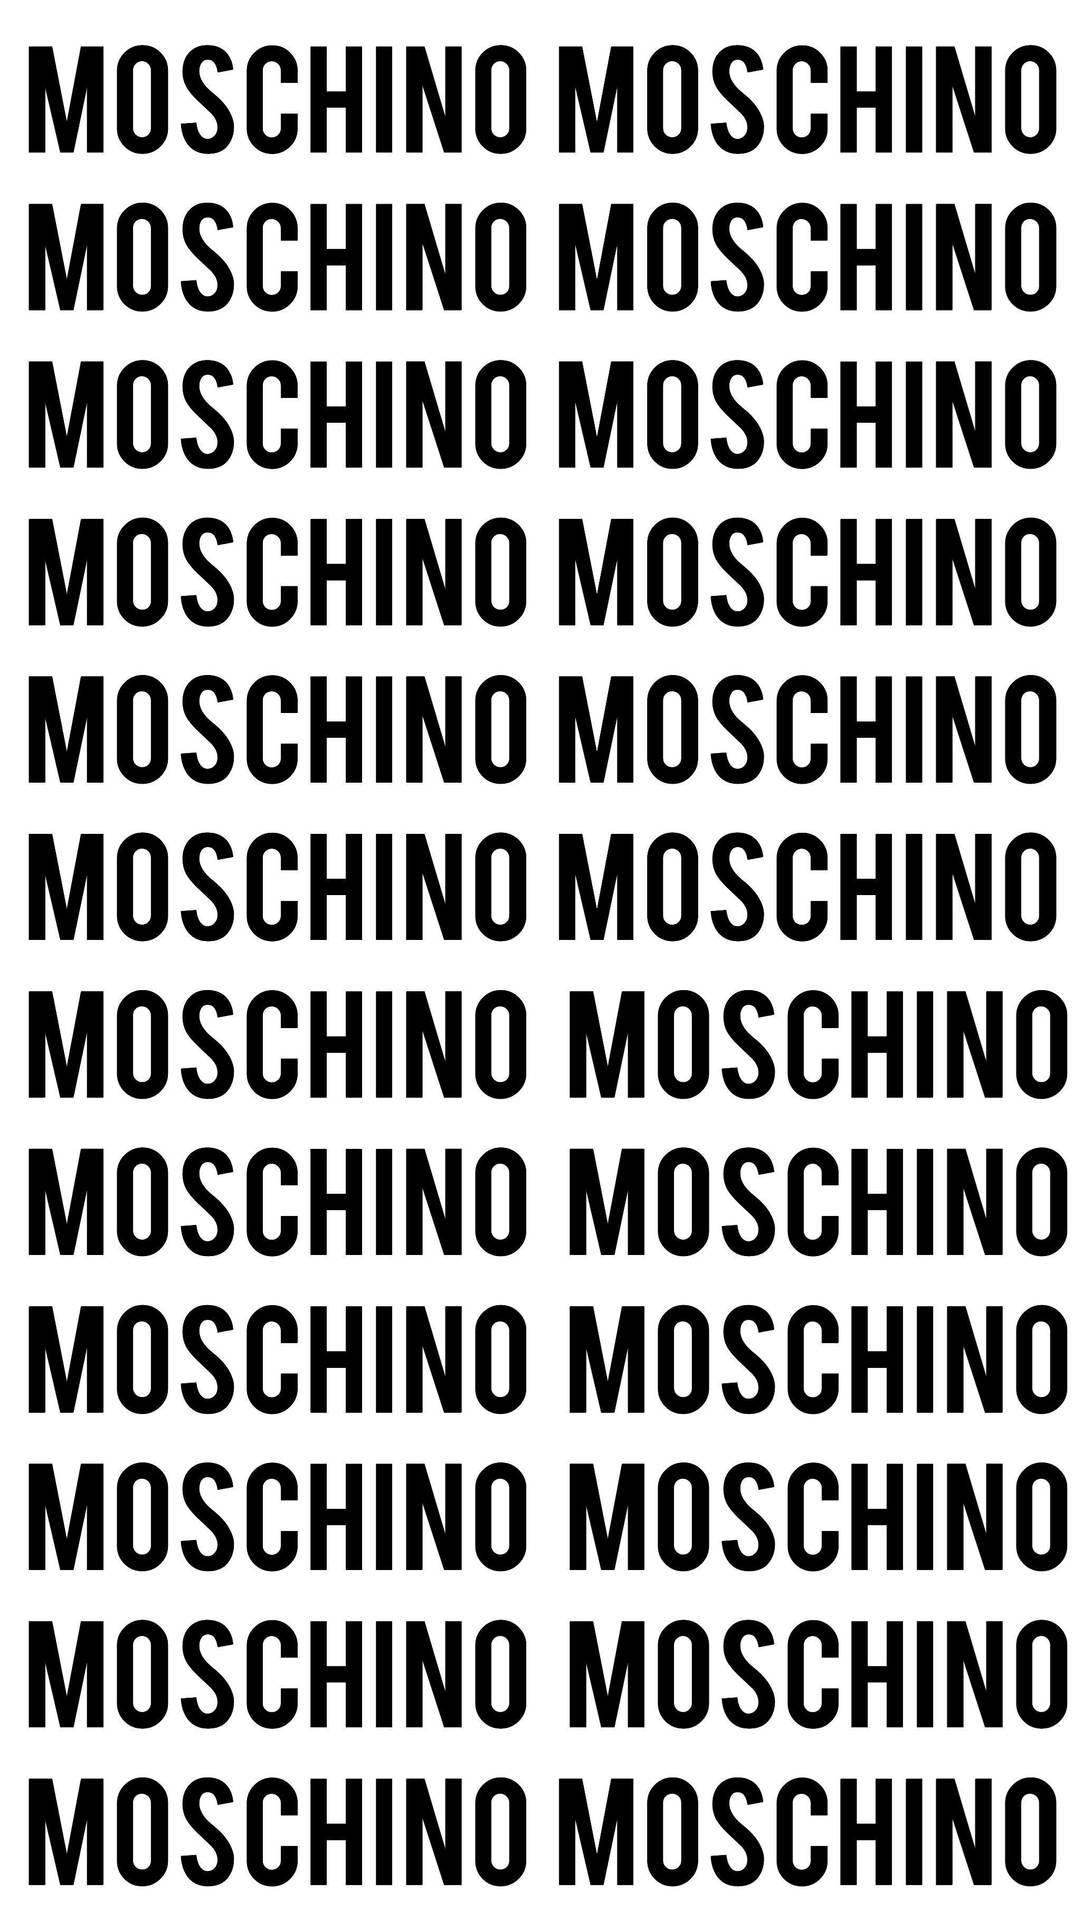 Download Simple Black And White Moschino Logo Wallpaper | Wallpapers.com